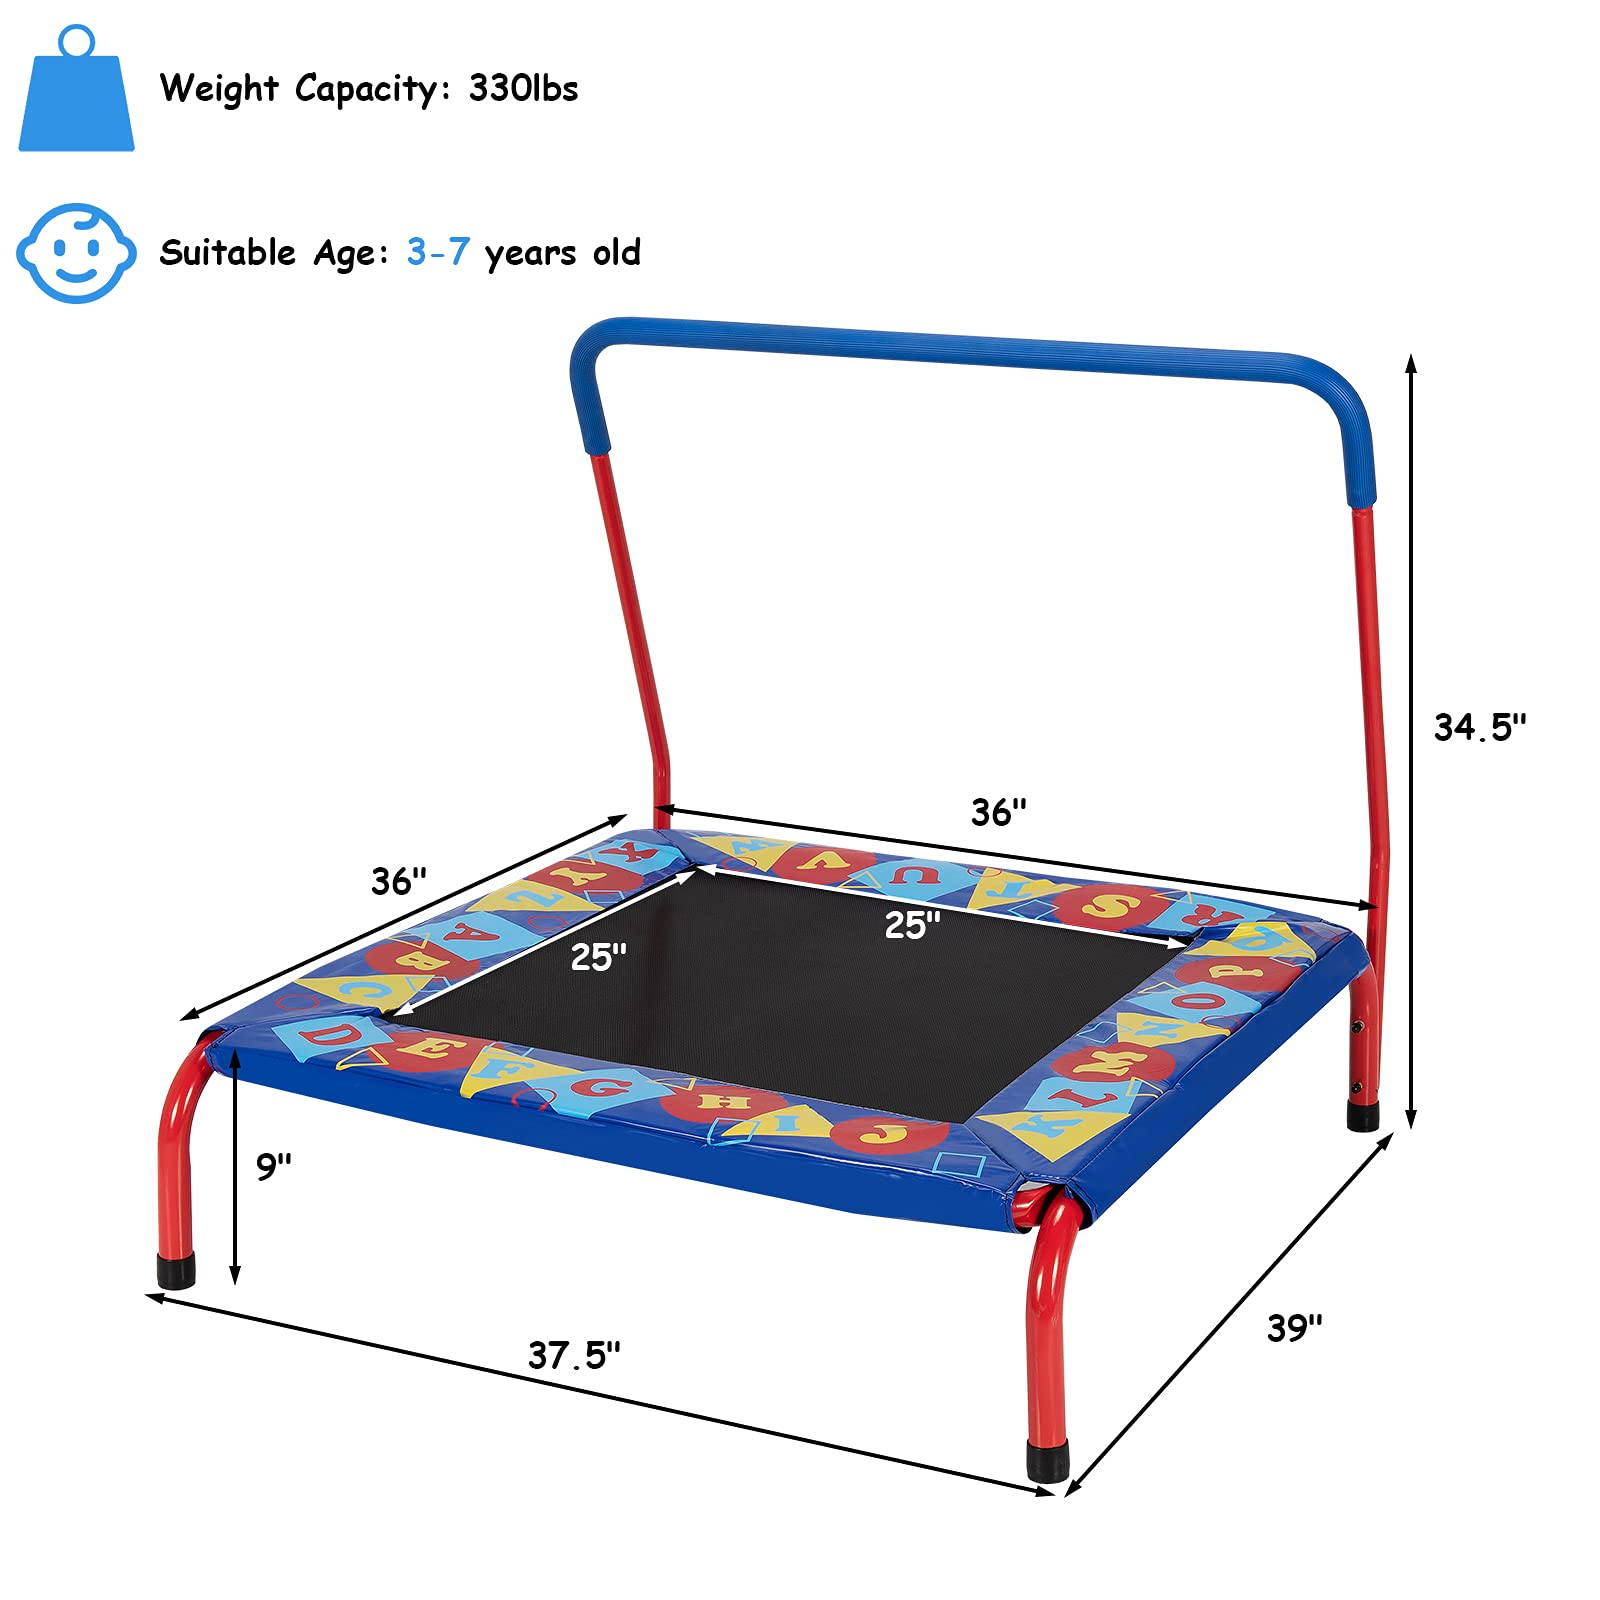 ASTM Approved Square Workout Rebounder Trampoline with Safety Padded Cover